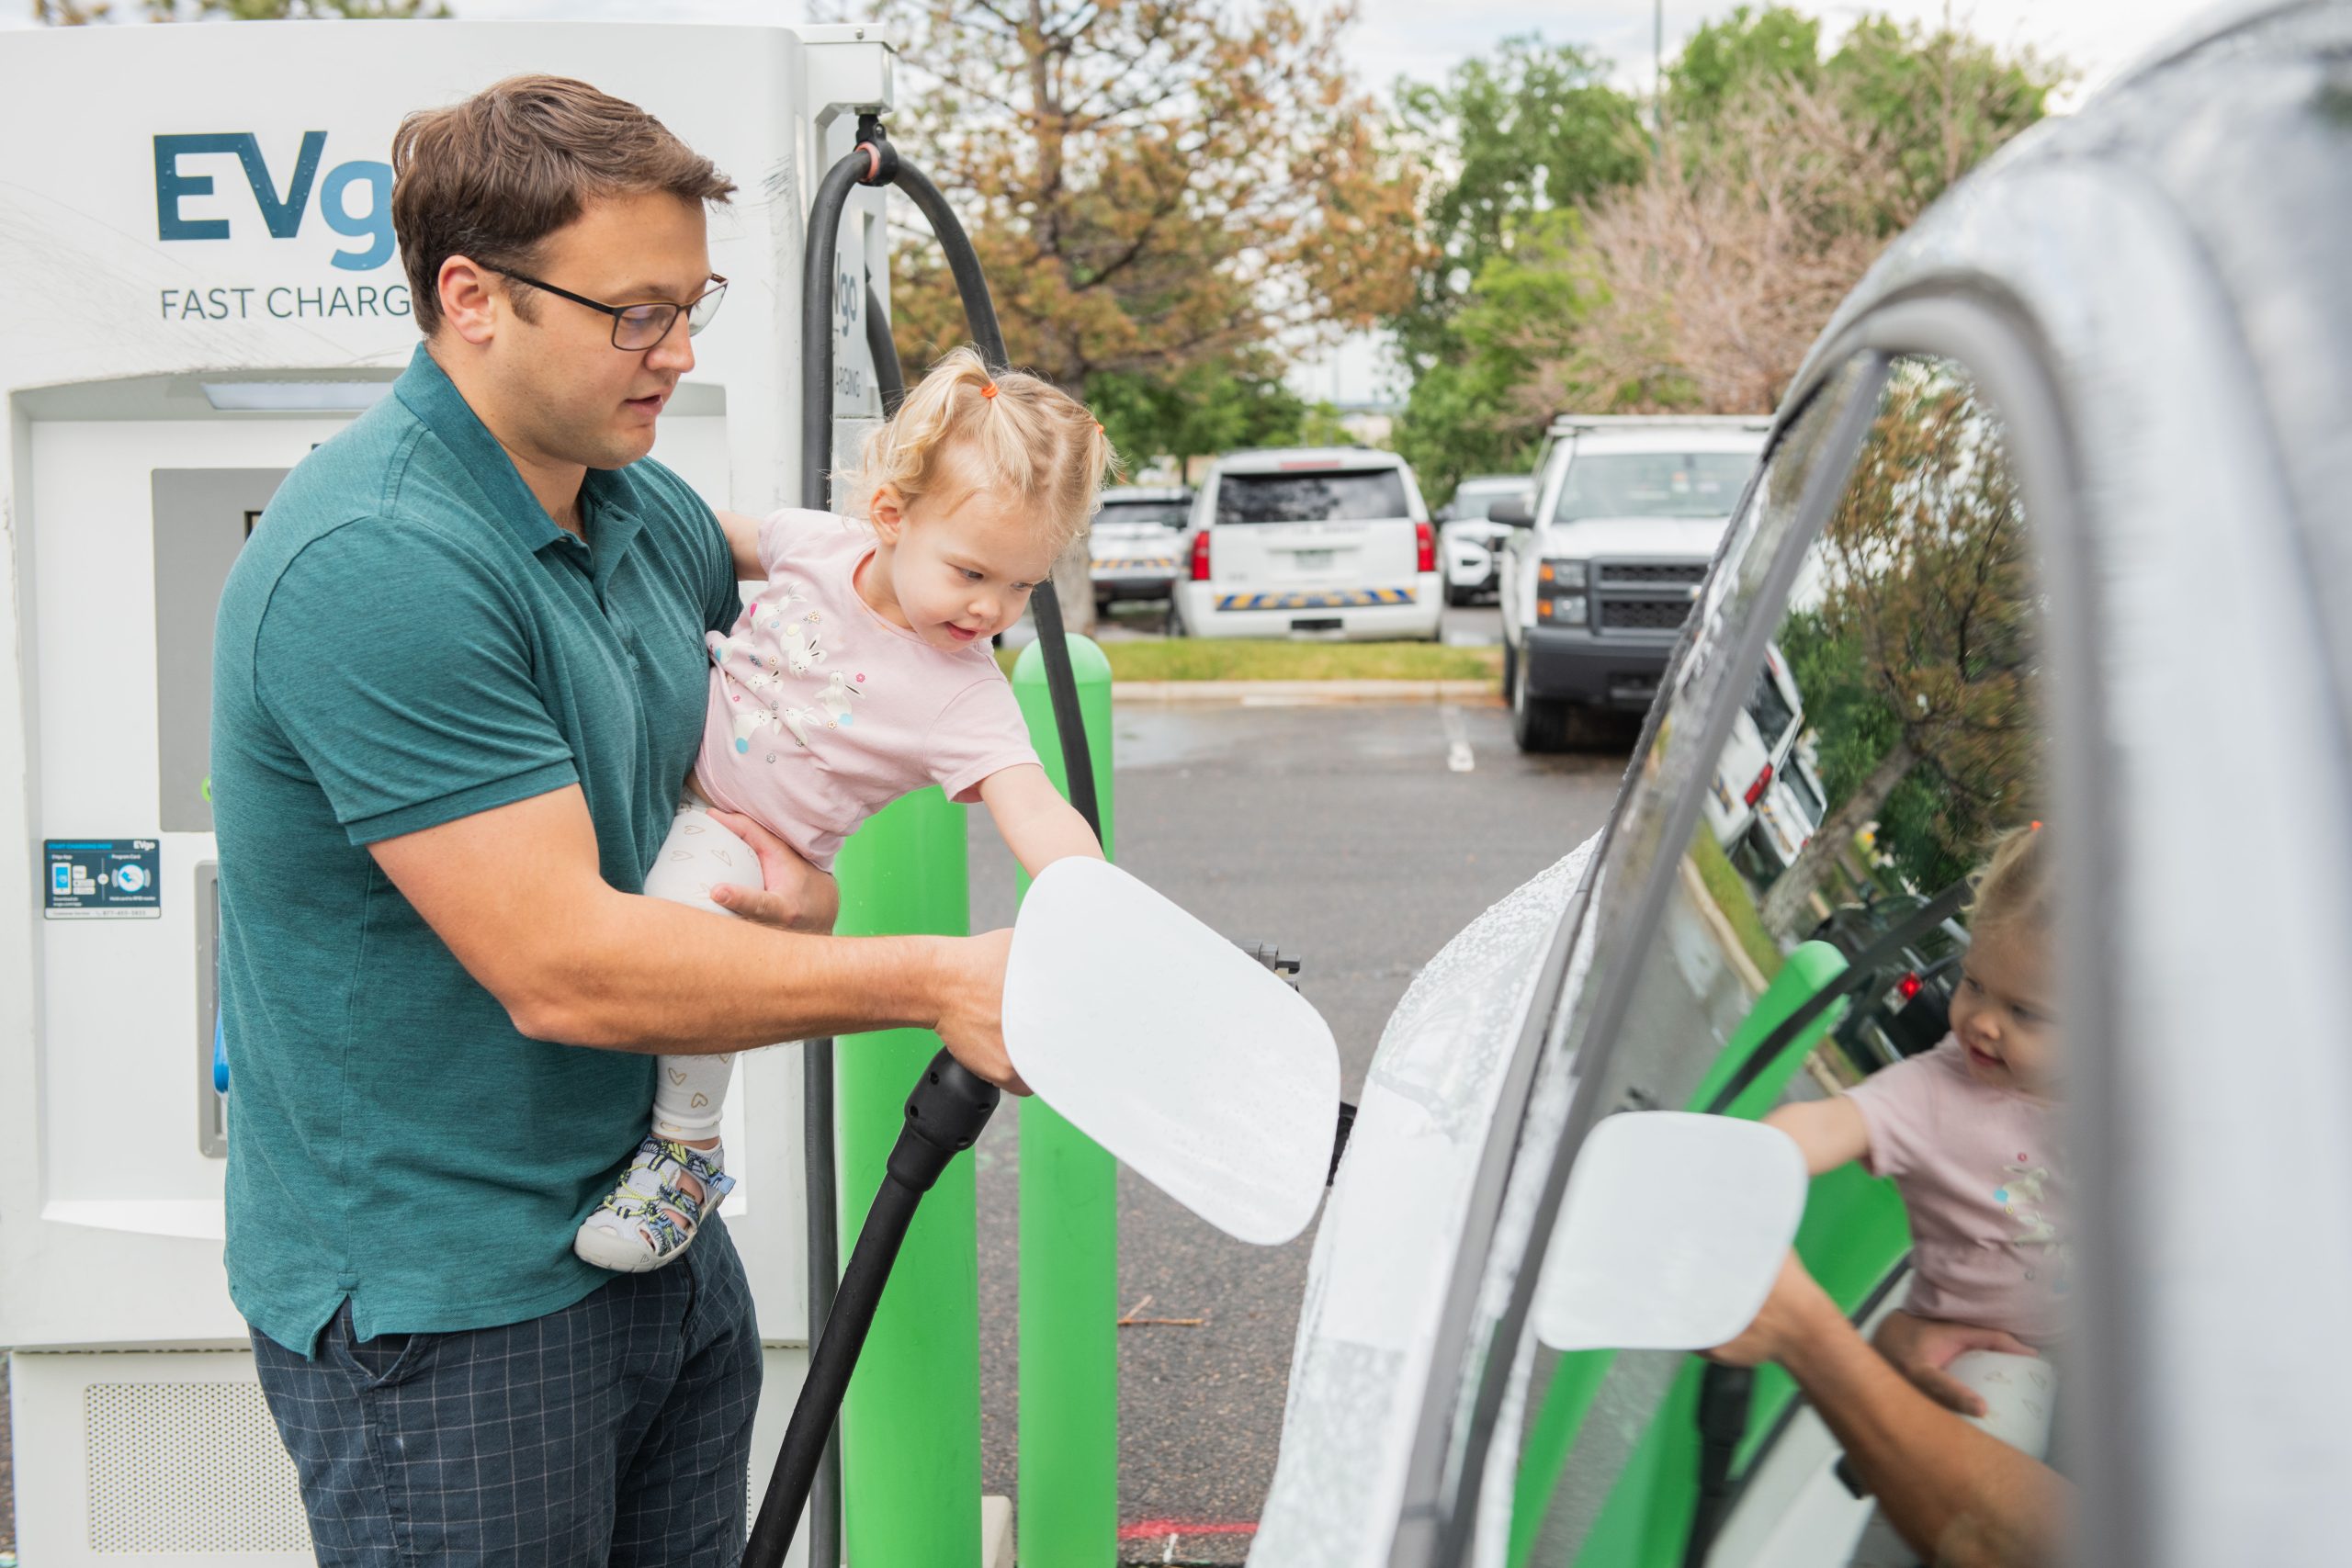 A Father and young daughter plug in an EV together at a public charging station